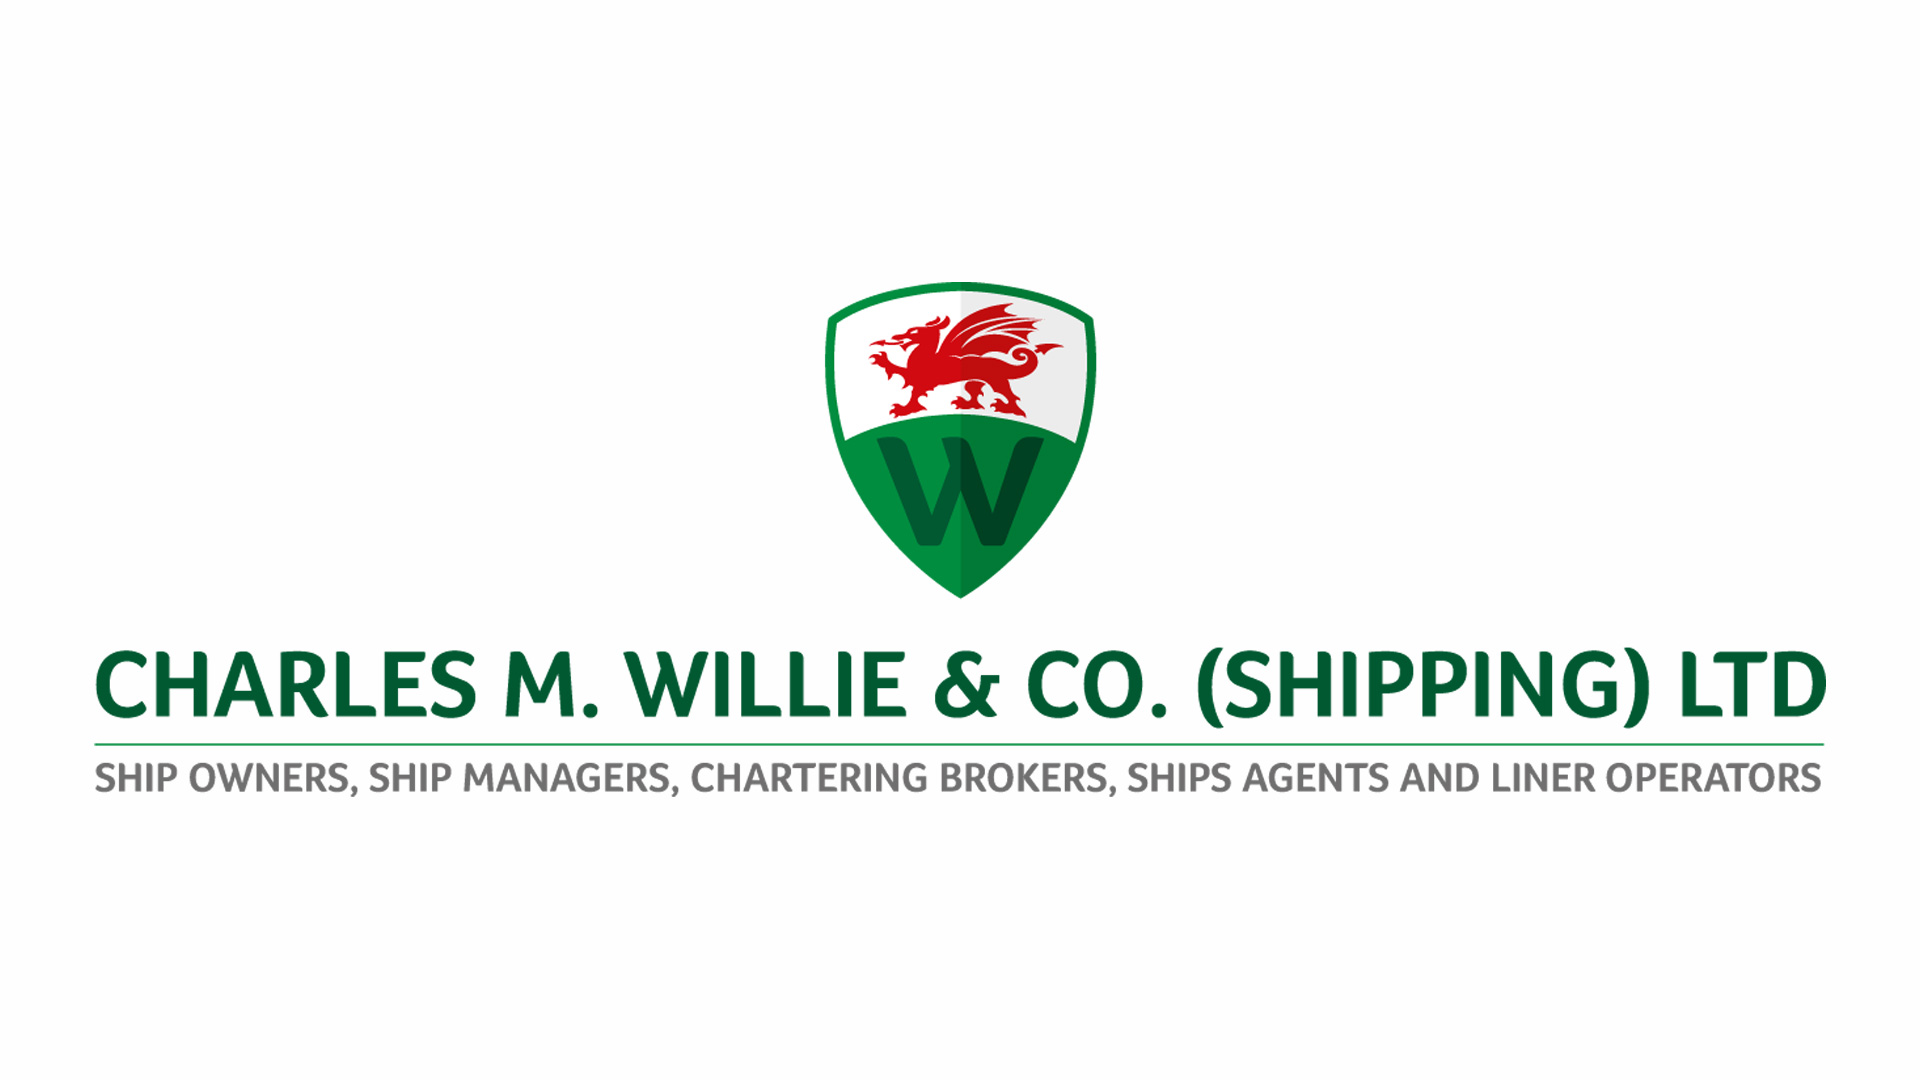 Our match ball sponsors for the Plymouth Argyle match...